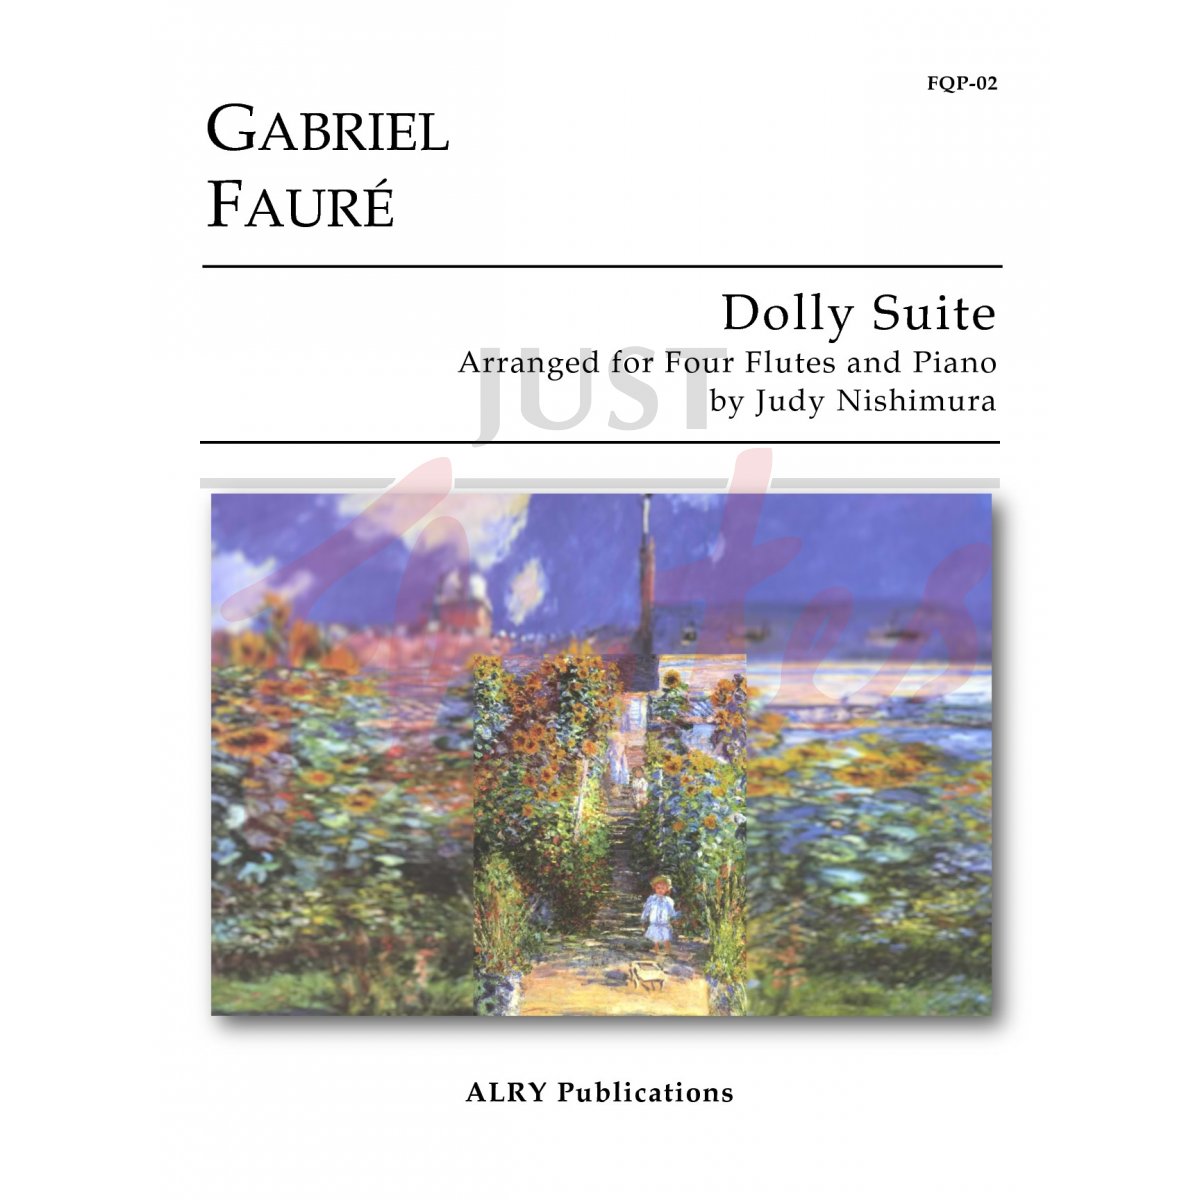 Dolly Suite for Four Flutes and Piano